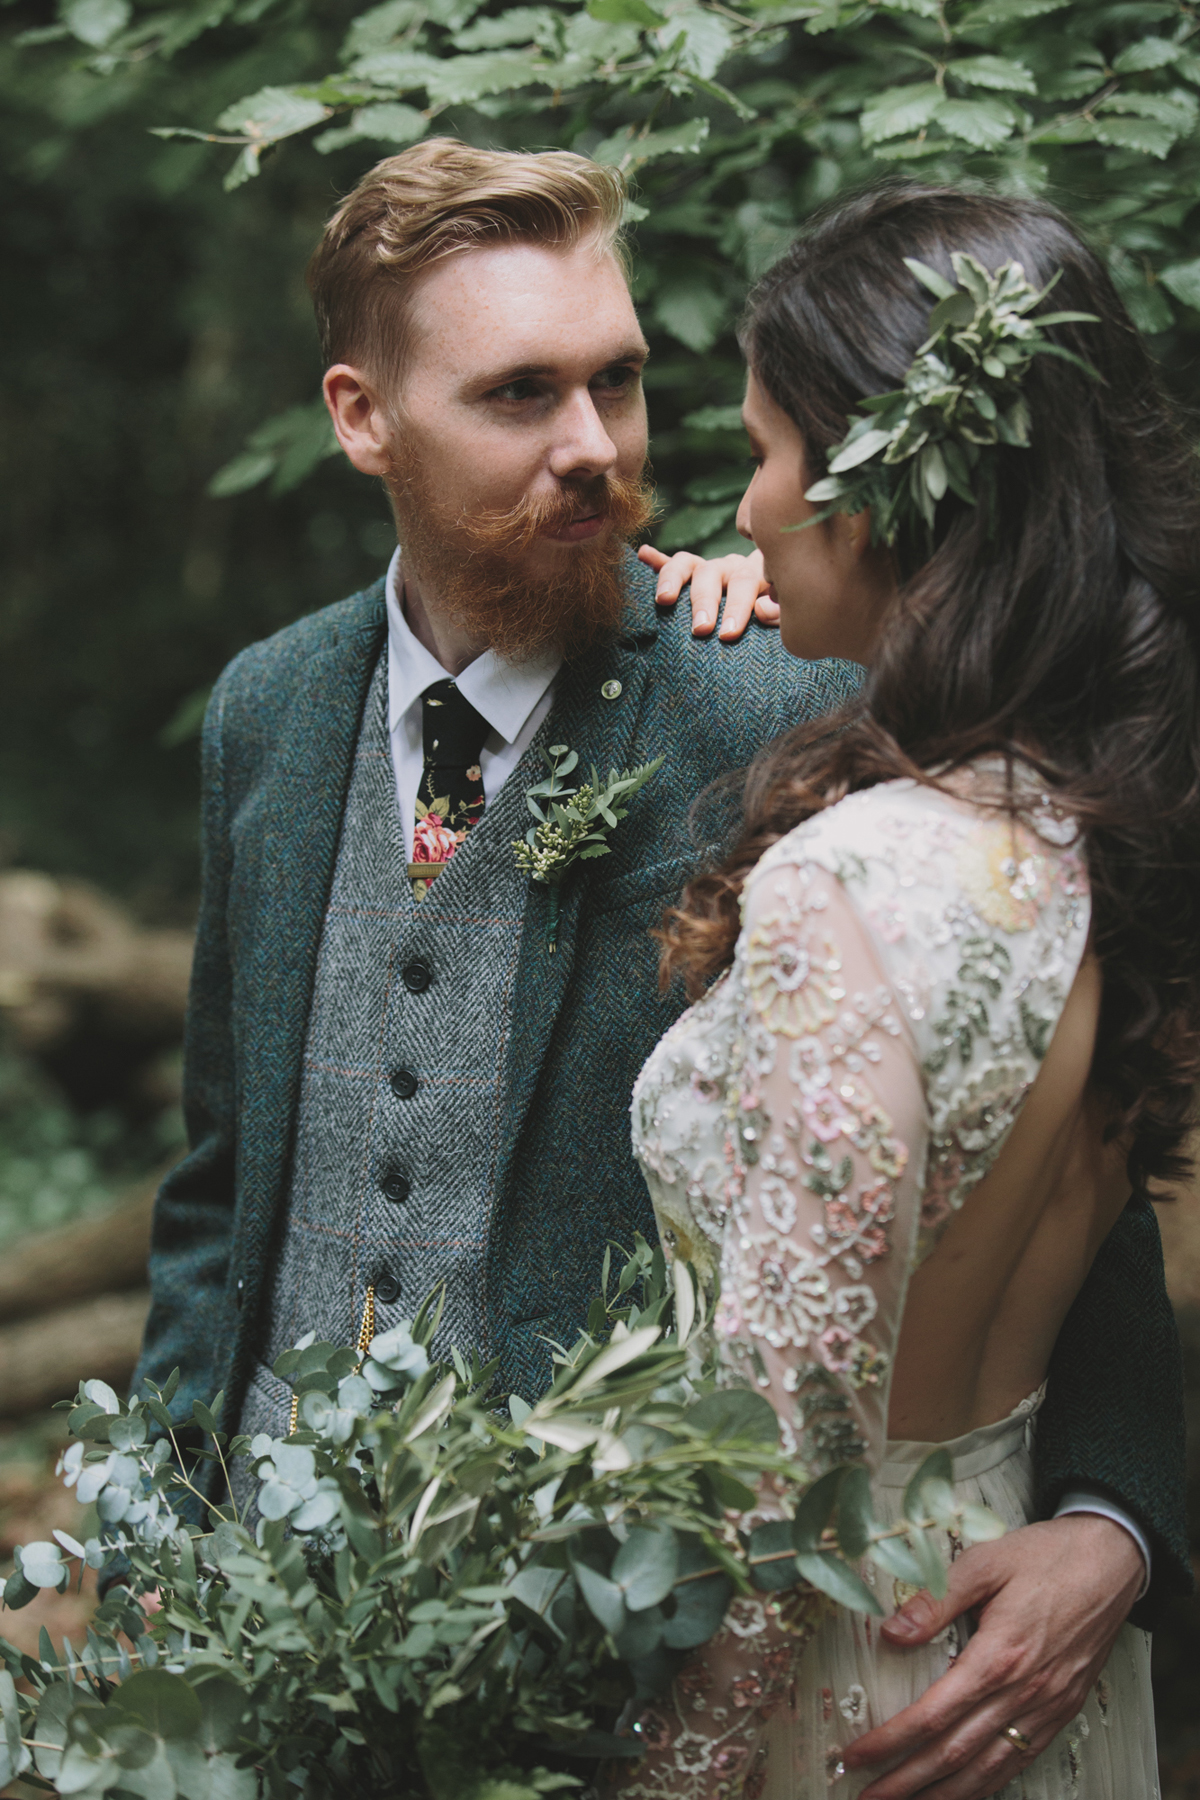 63 Bride in a Needle Thread gown and a Groom with a handlebar moustache and ASOS suit standing in woodland image by McKinley Rodgers